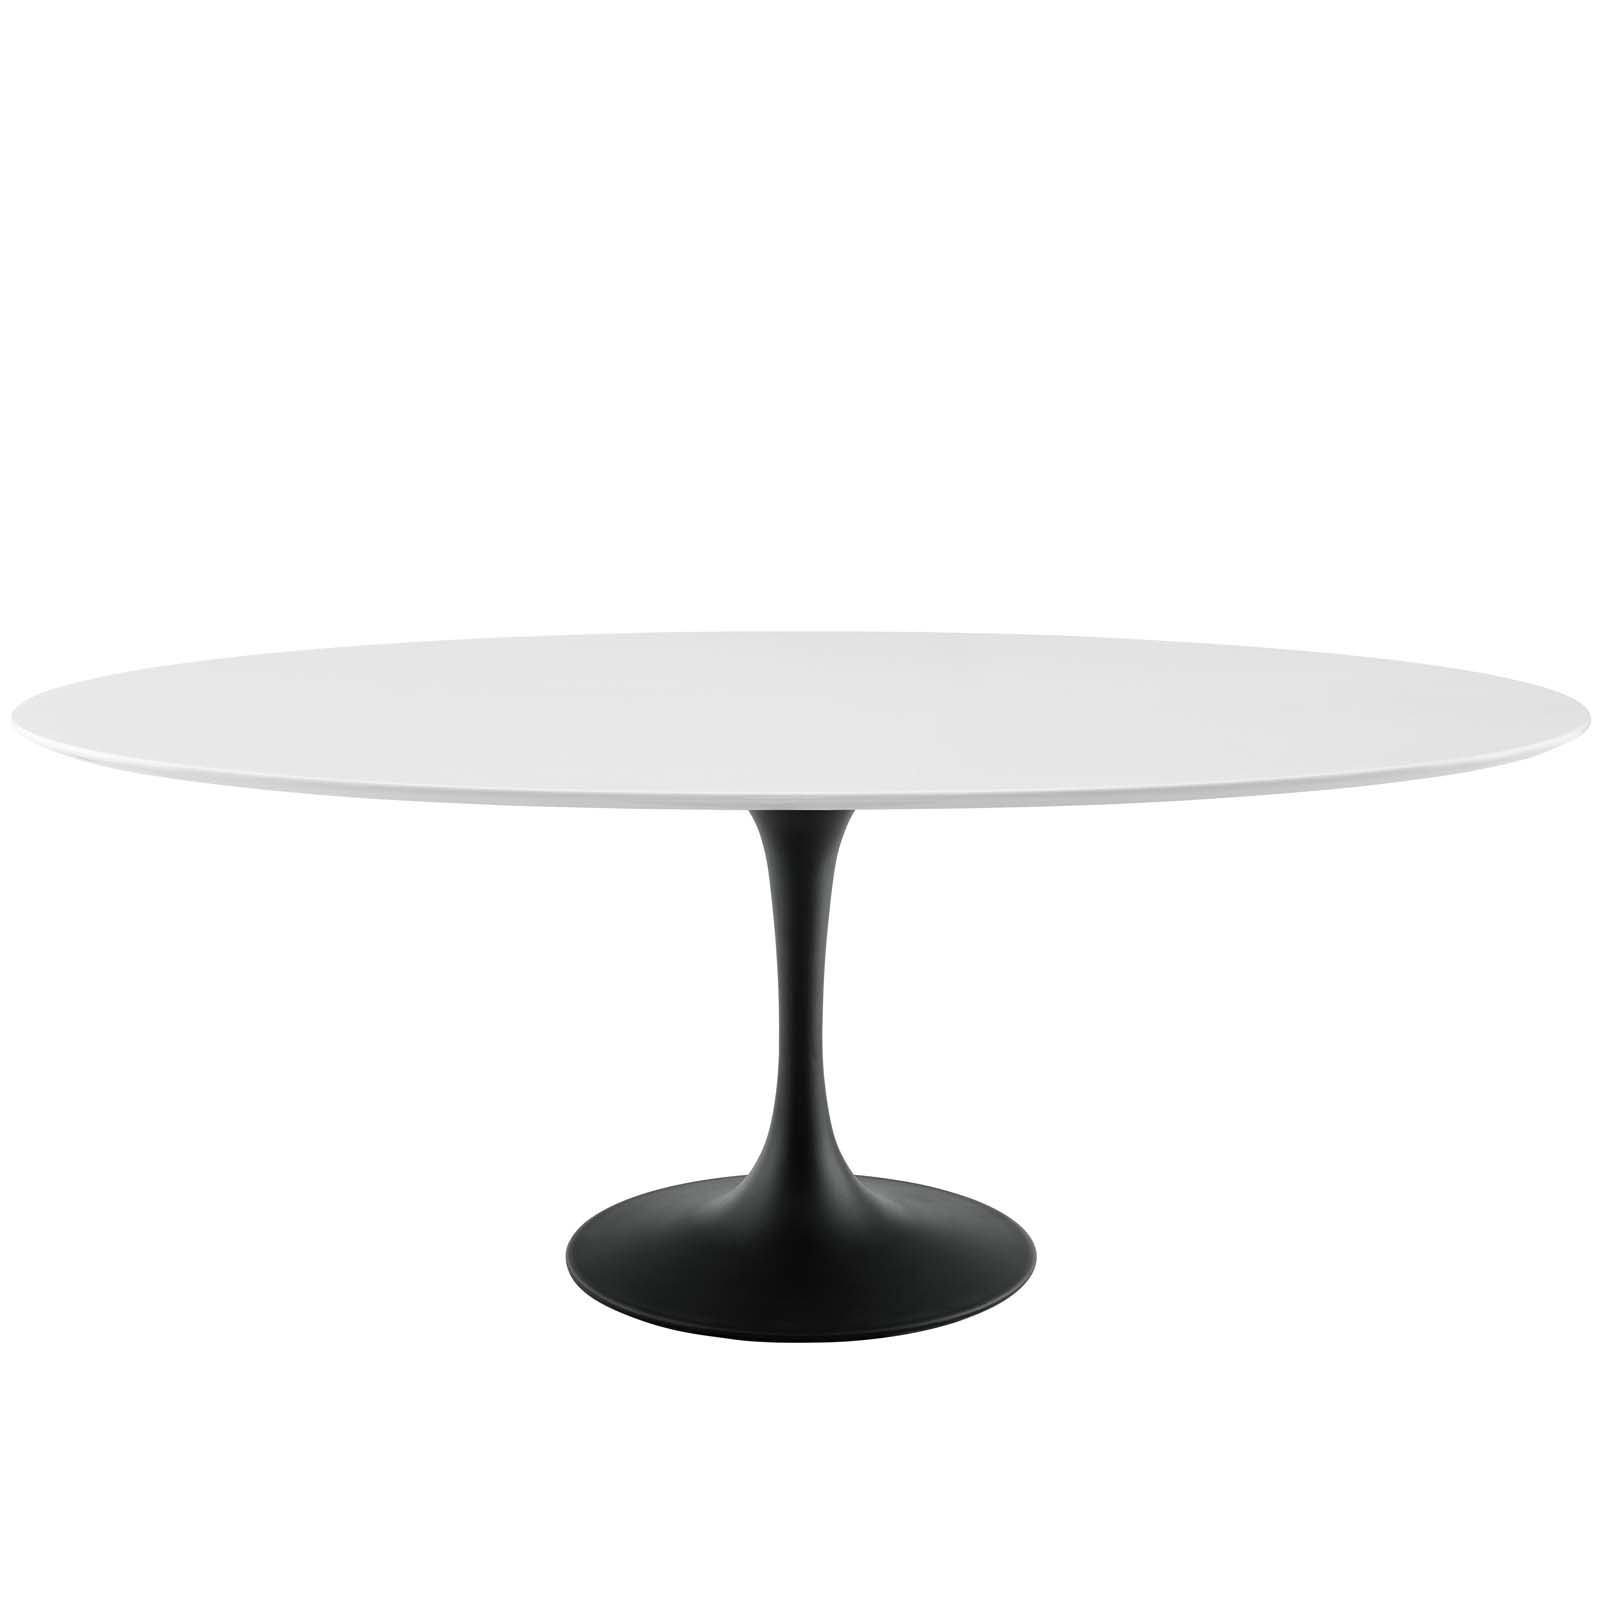 Lippa 78" Oval Wood Dining Table in Black White by Modway